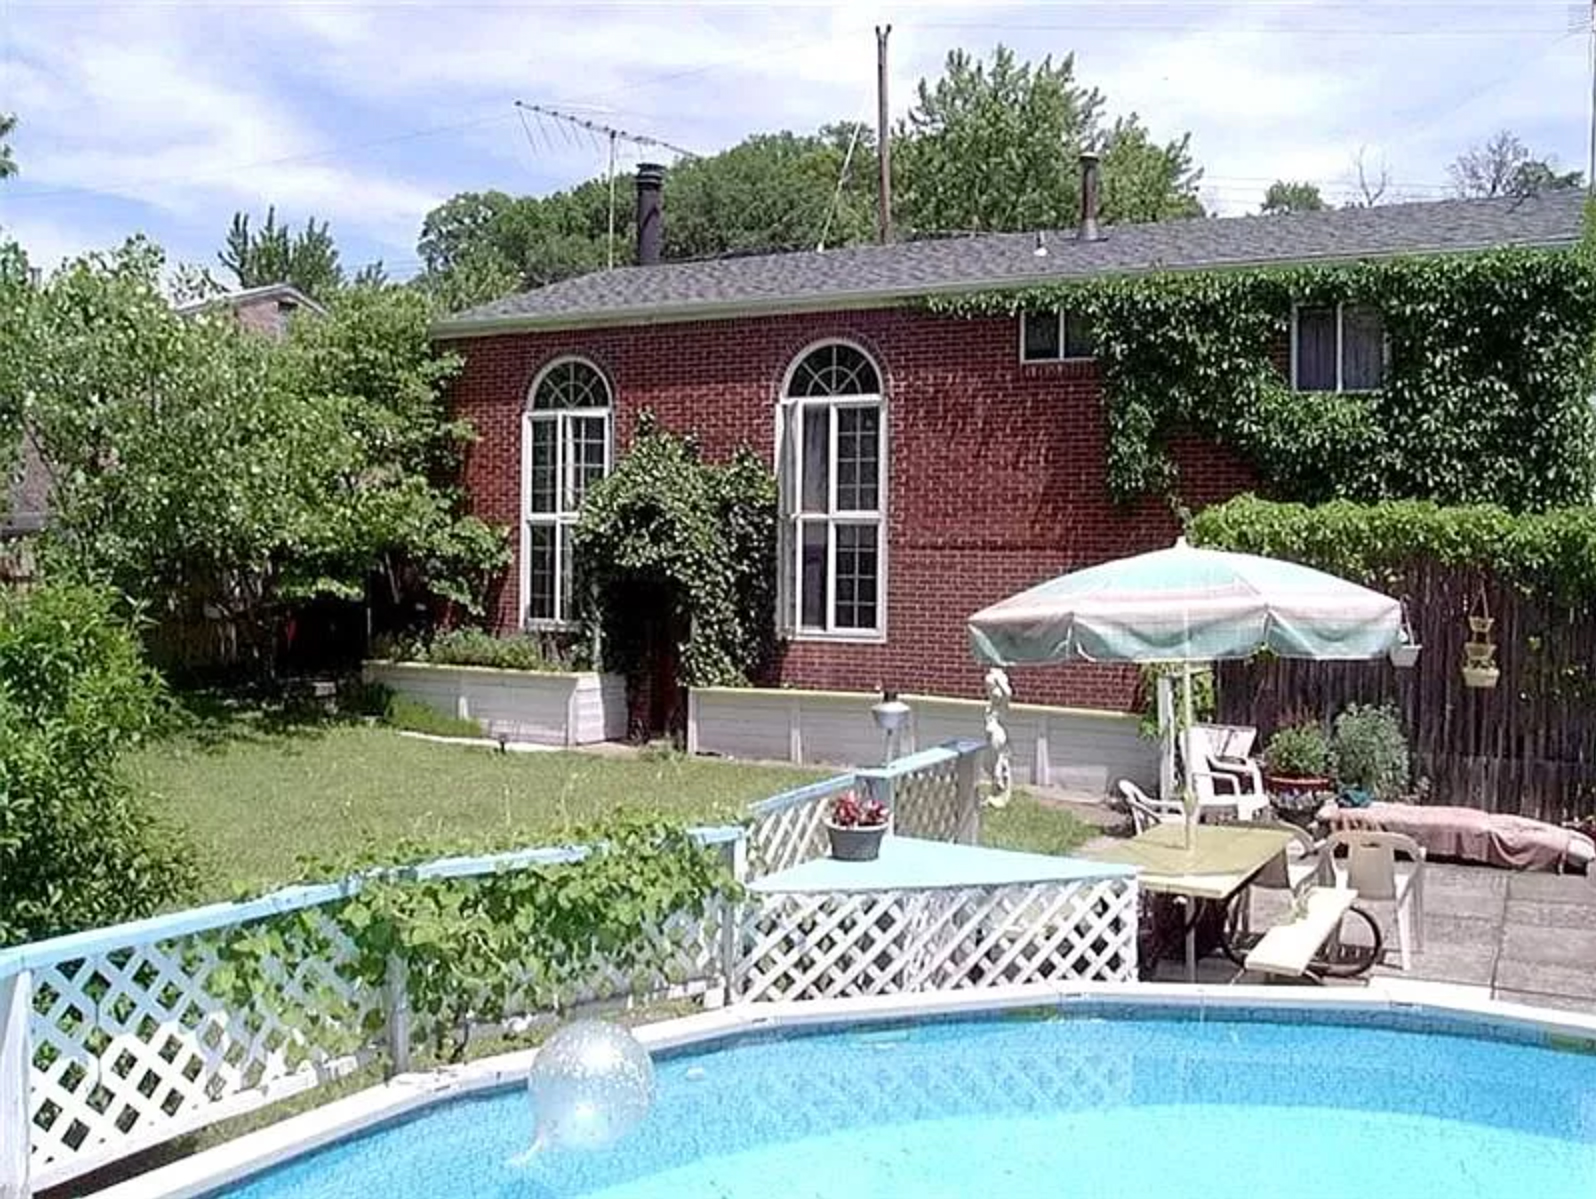 backyard of house with swimming pool